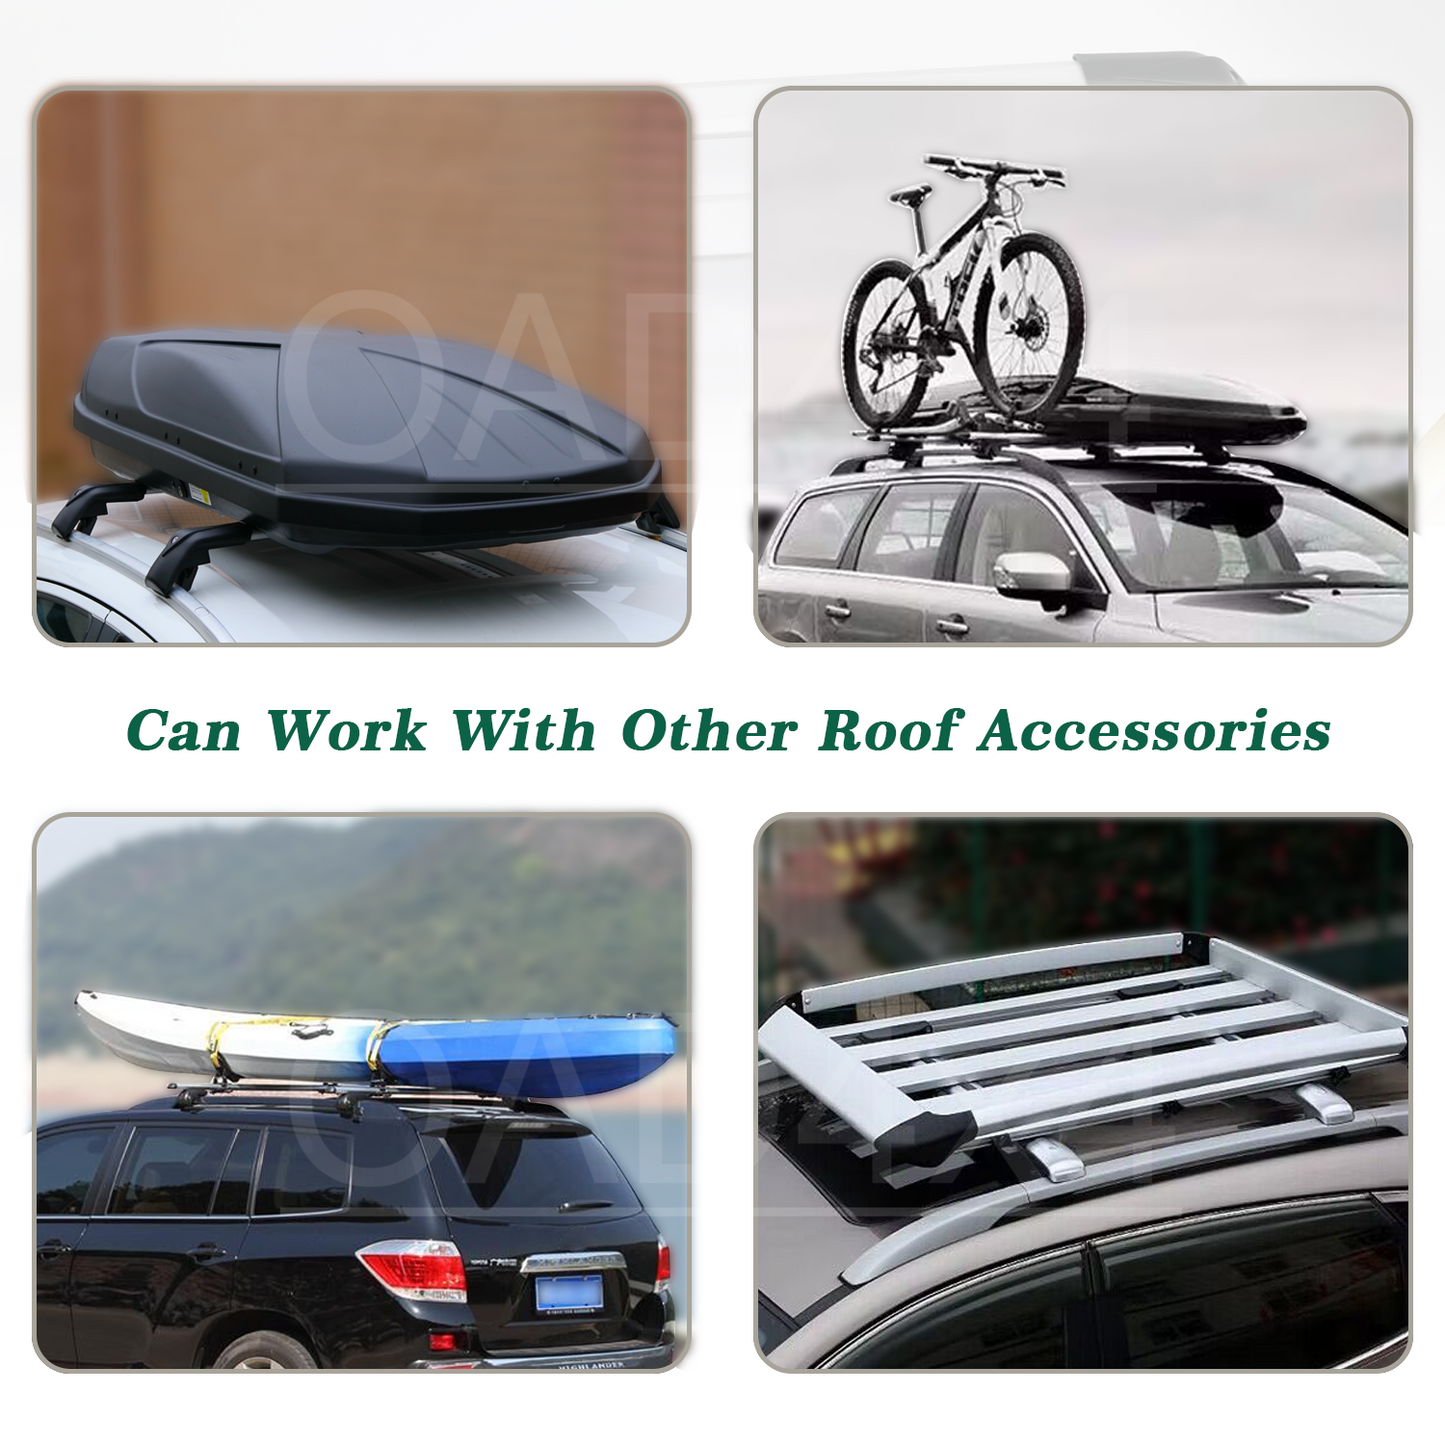 1 Pair Aluminum Silver Cross Bar Roof Racks Baggage holder for Volkswagen Golf Wagon 07-18 with raised roof rail